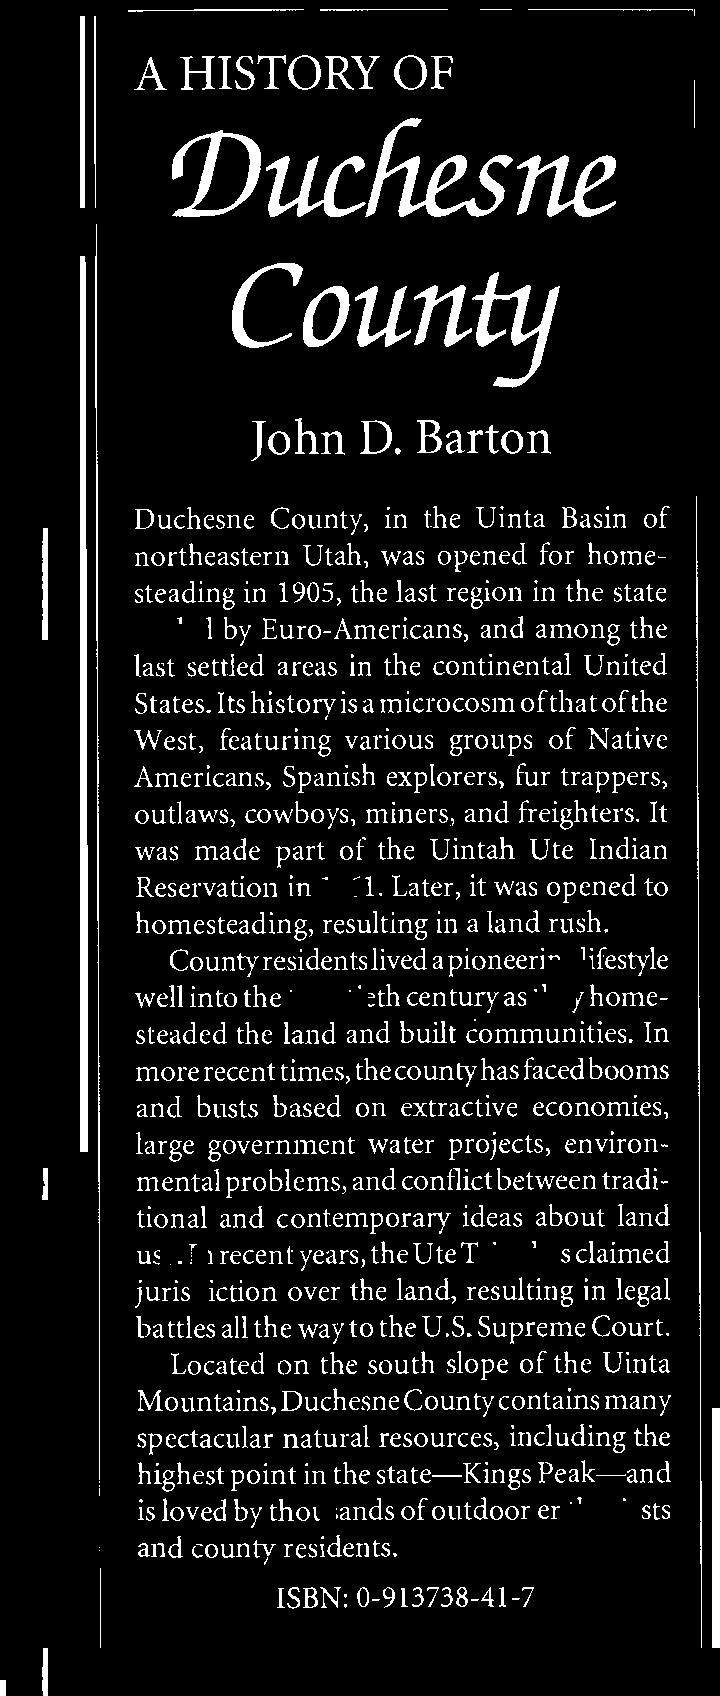 continental United States. Its history is a microcosm of that of the West, featuring various groups of Native Americans, Spanish explorers, fur trappers, outlaws, cowboys, miners, and freighters.